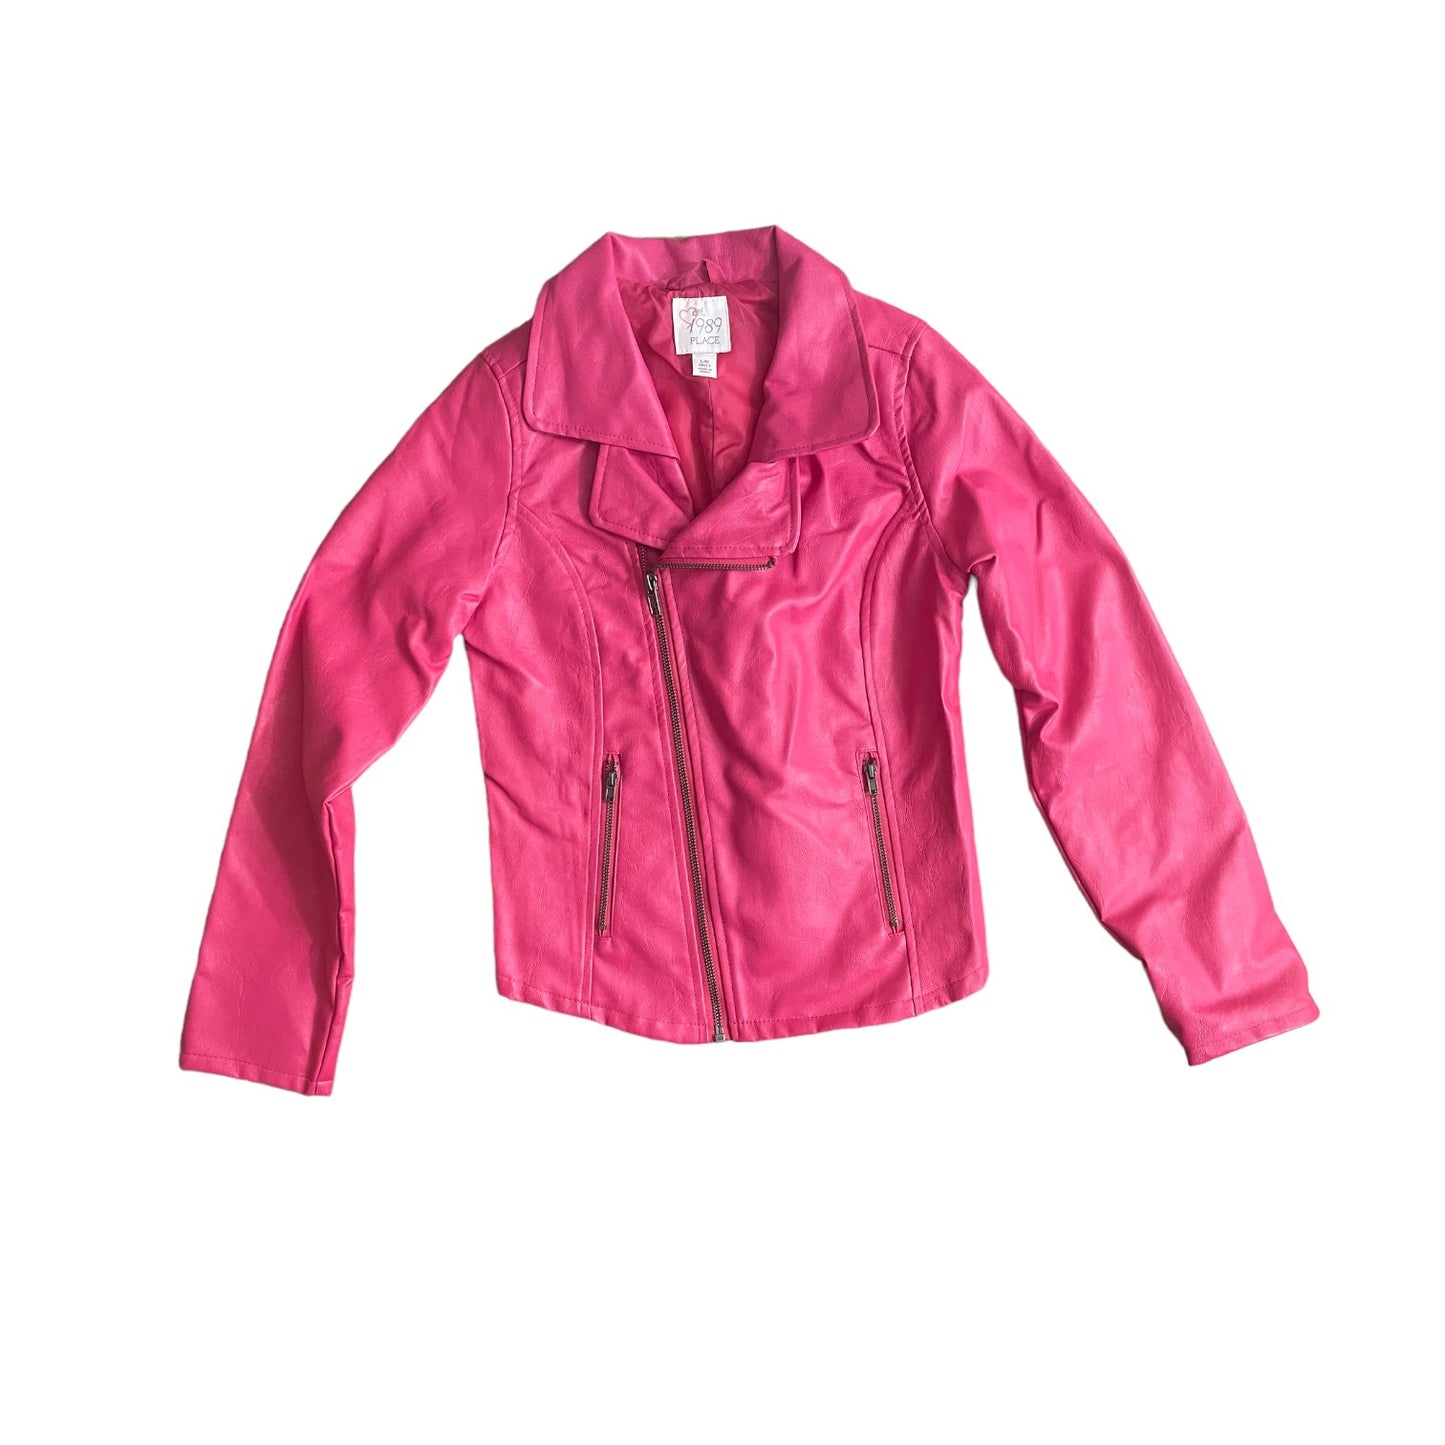 Place Faux Leather Girls Jacket